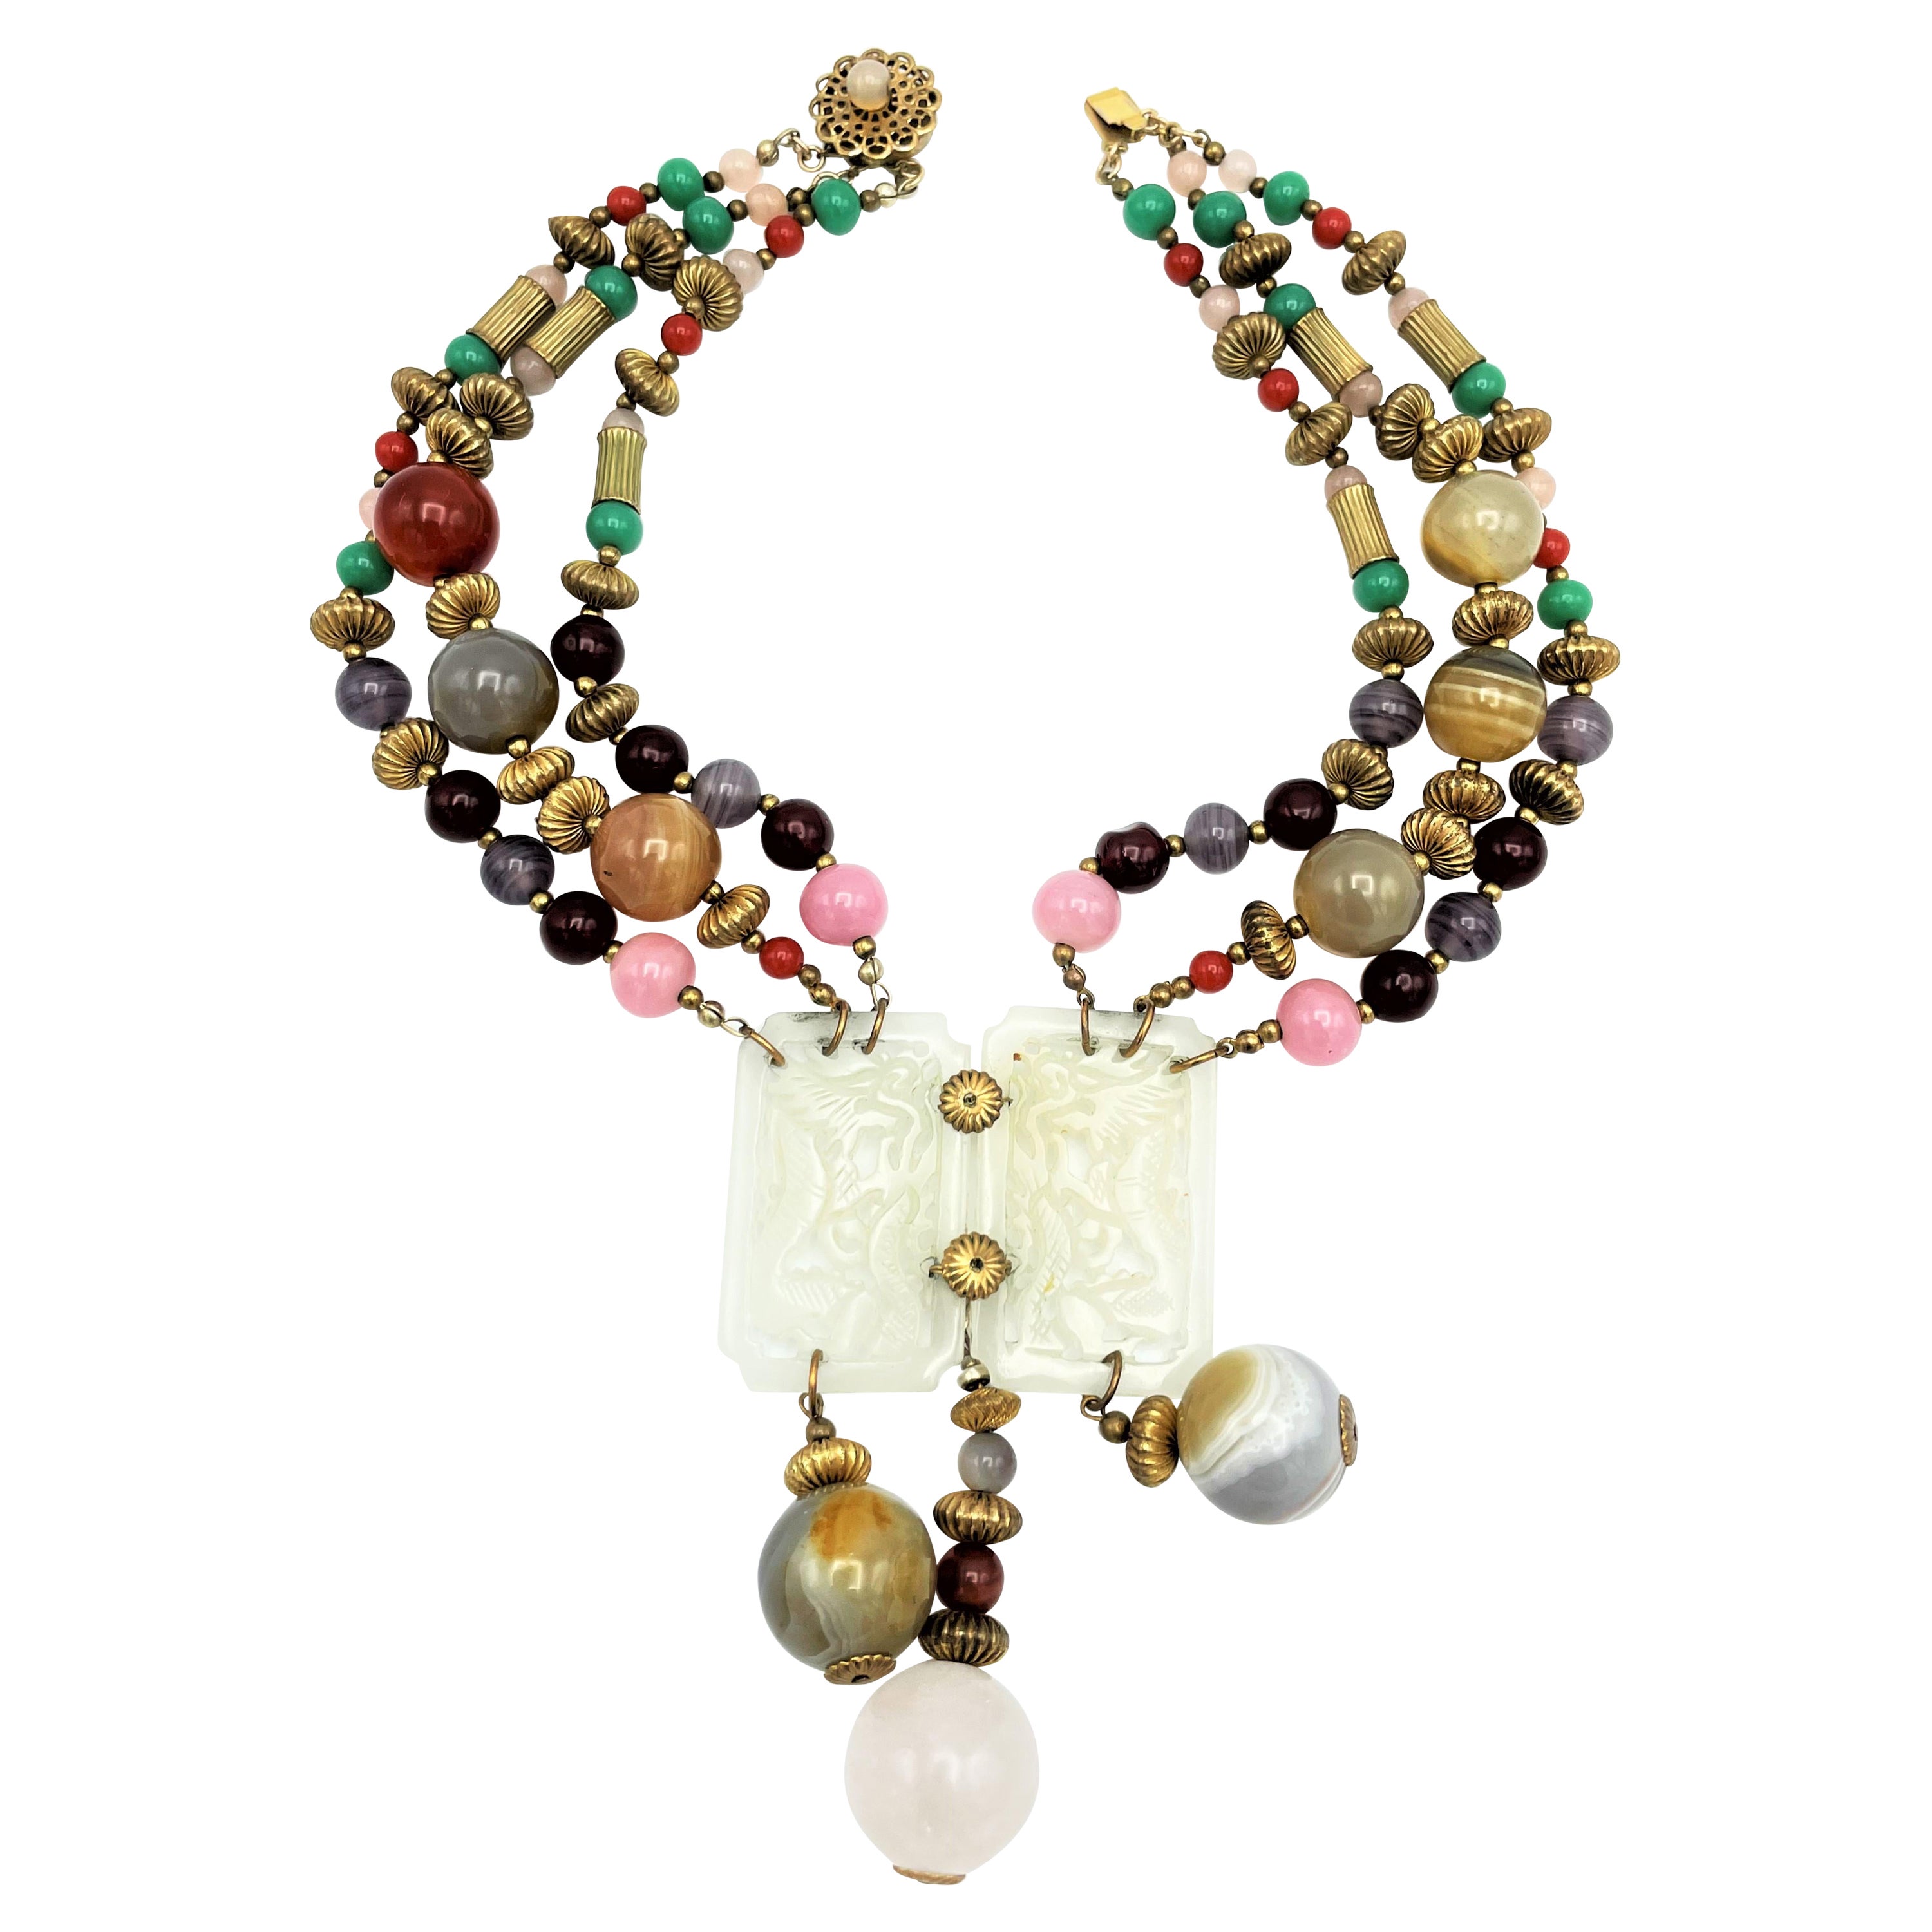 Vintage Miriam Haskell necklace, agate and glass beads, jade similar  1950s USA For Sale